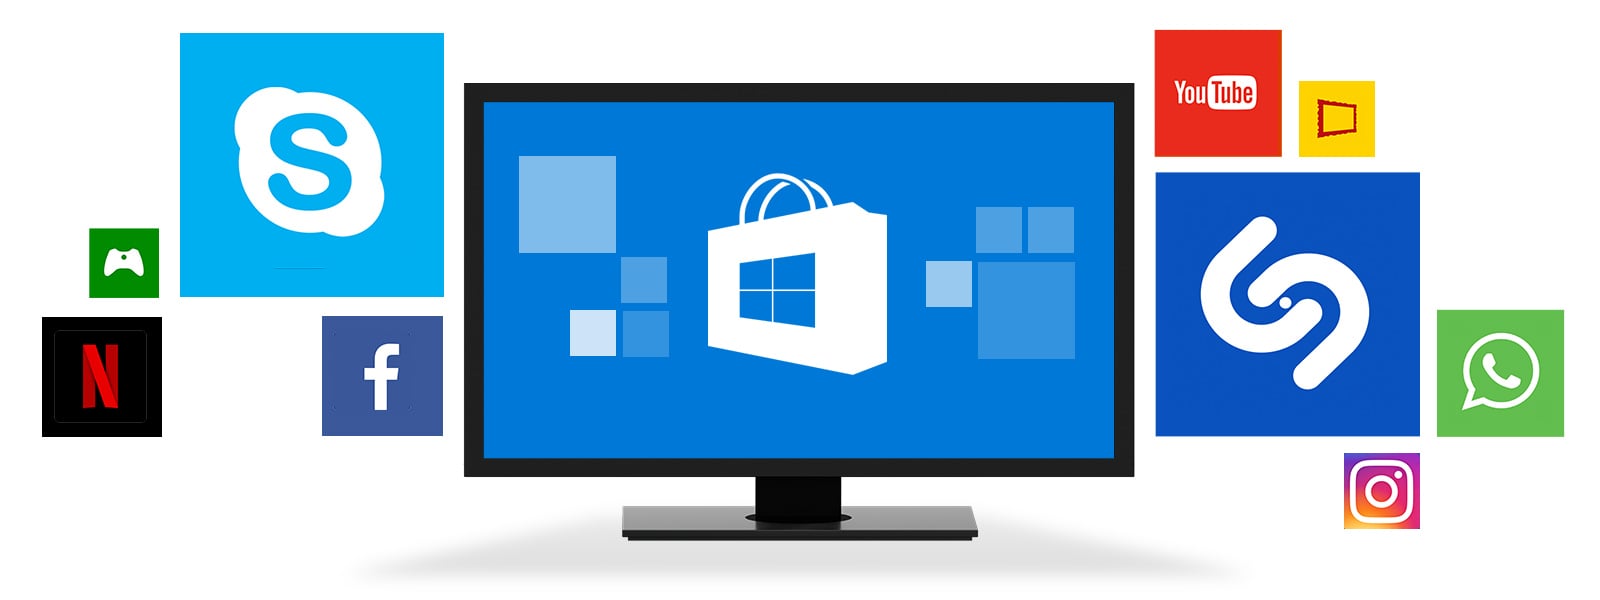 microsoft store apps free download